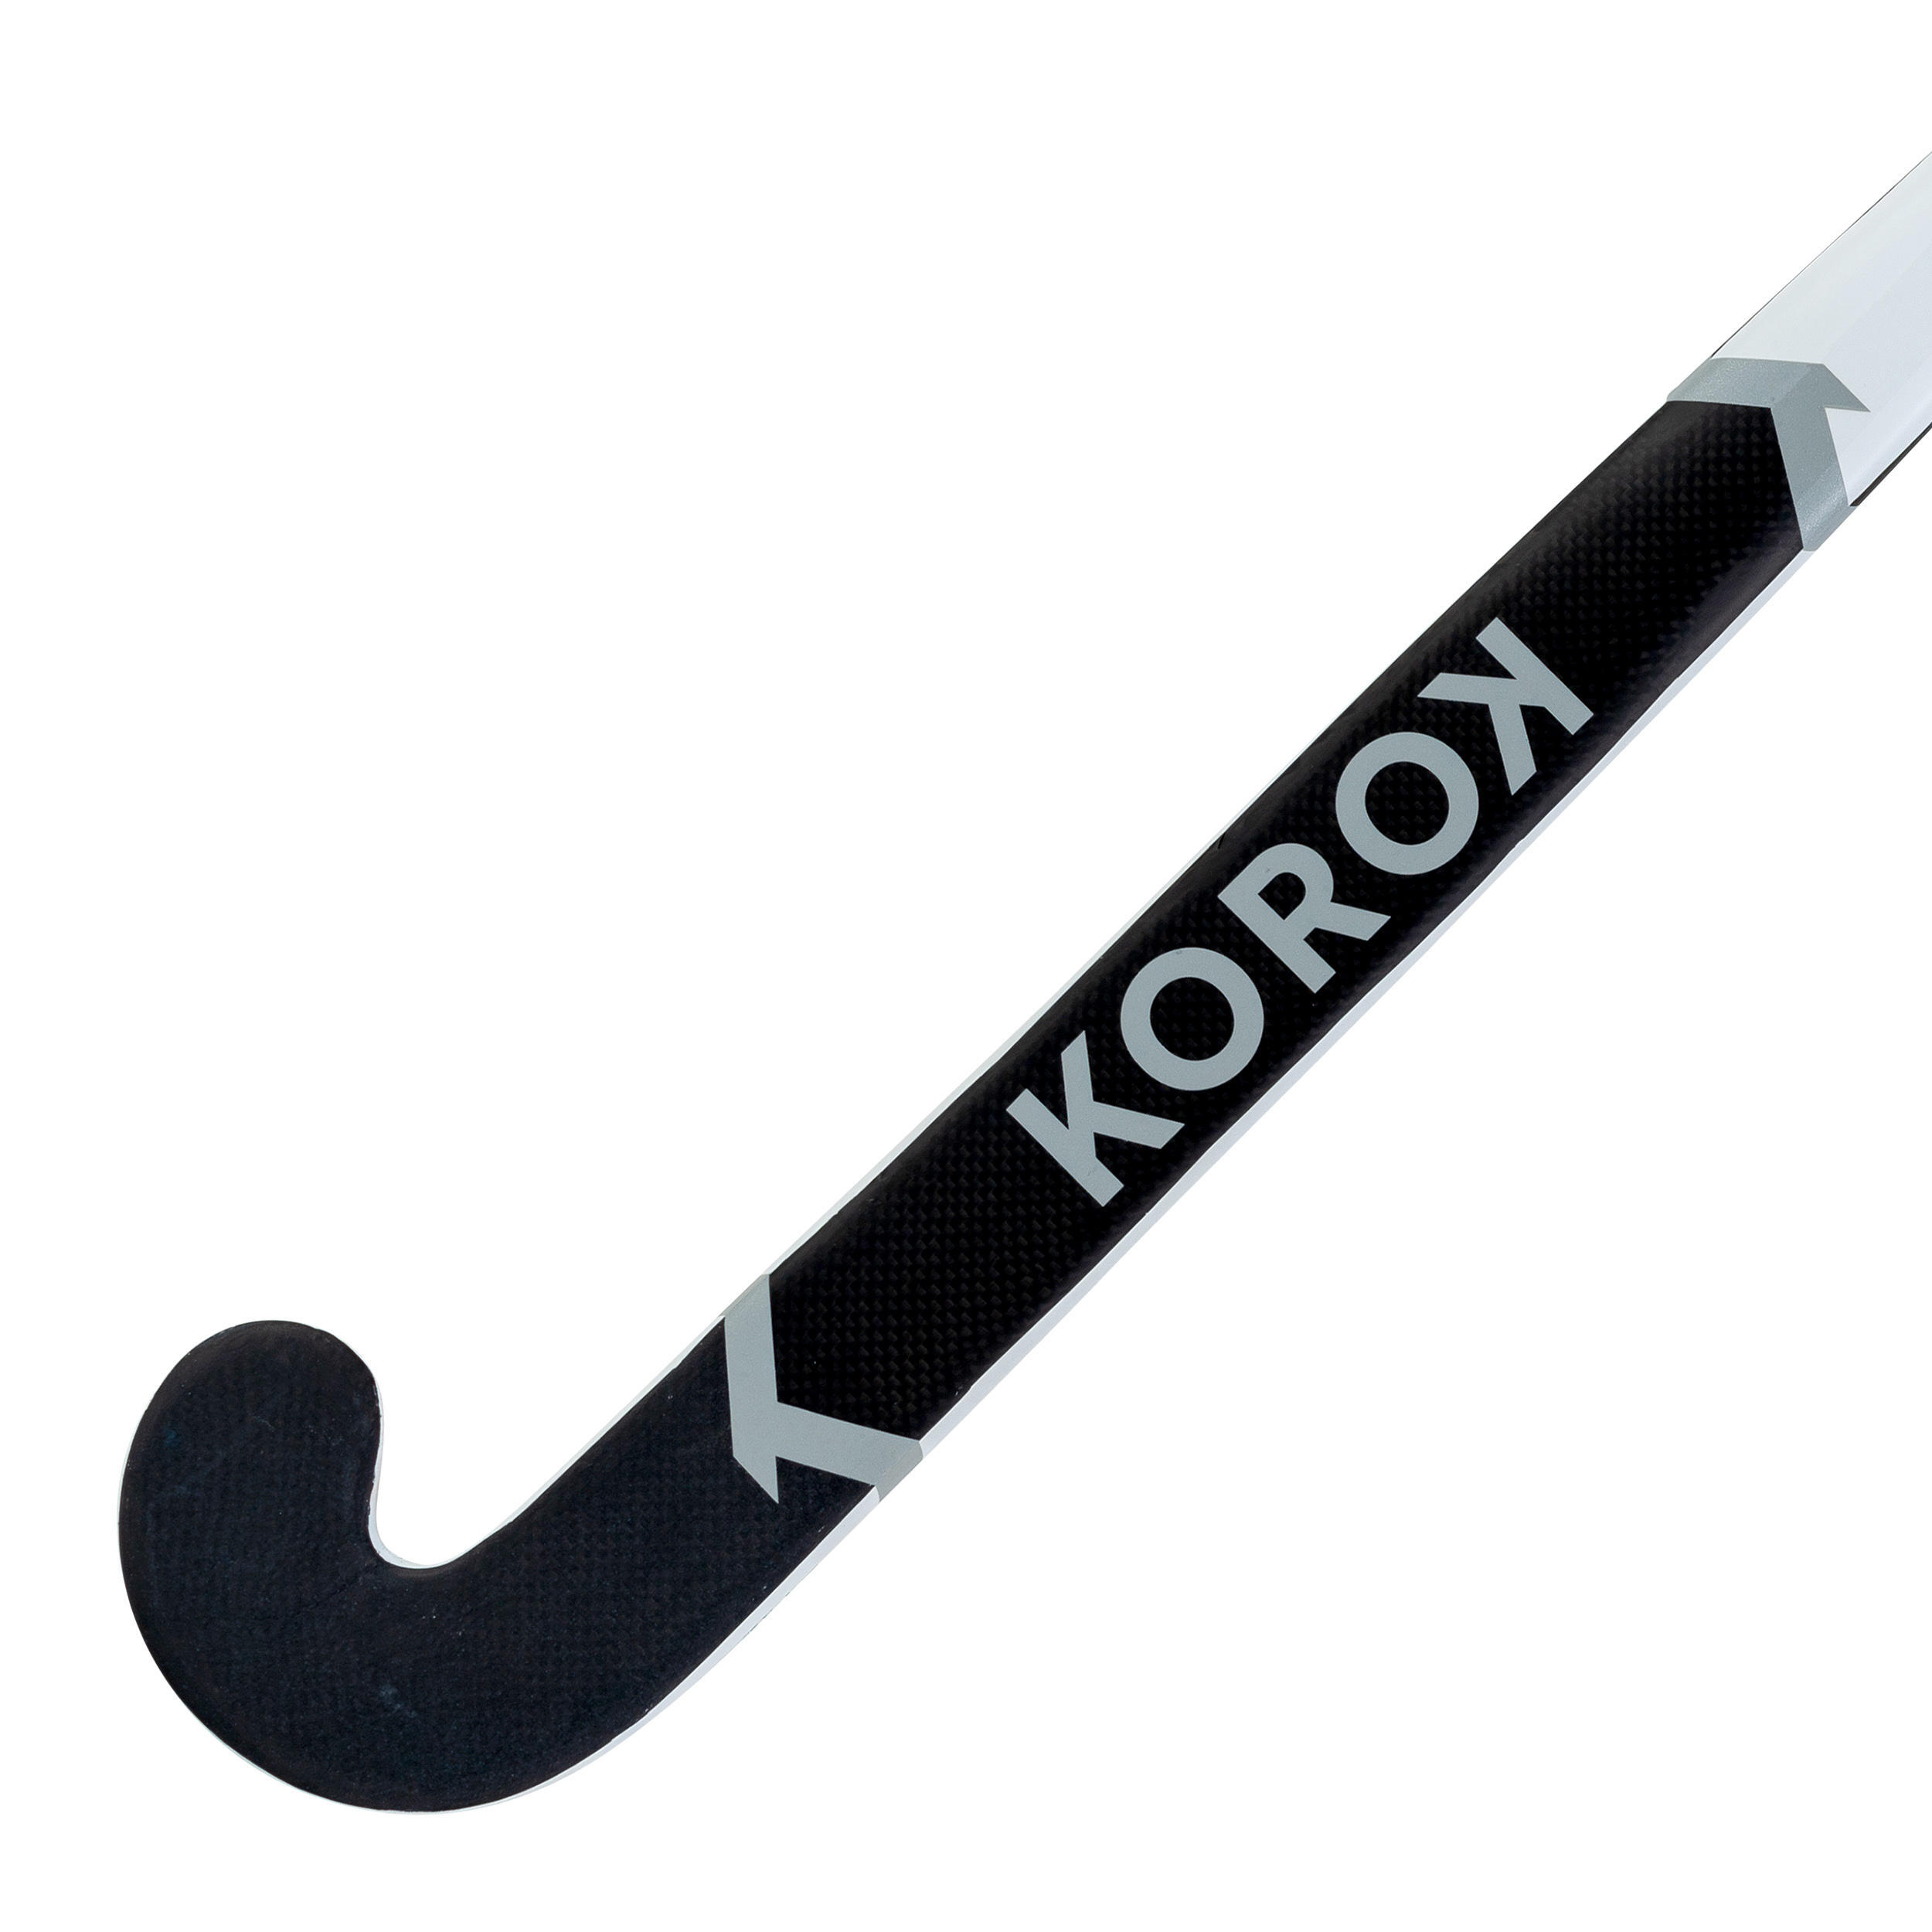 Adult Intermediate 60% Carbon Mid Bow Field Hockey Stick FH560 - White/Grey 4/12